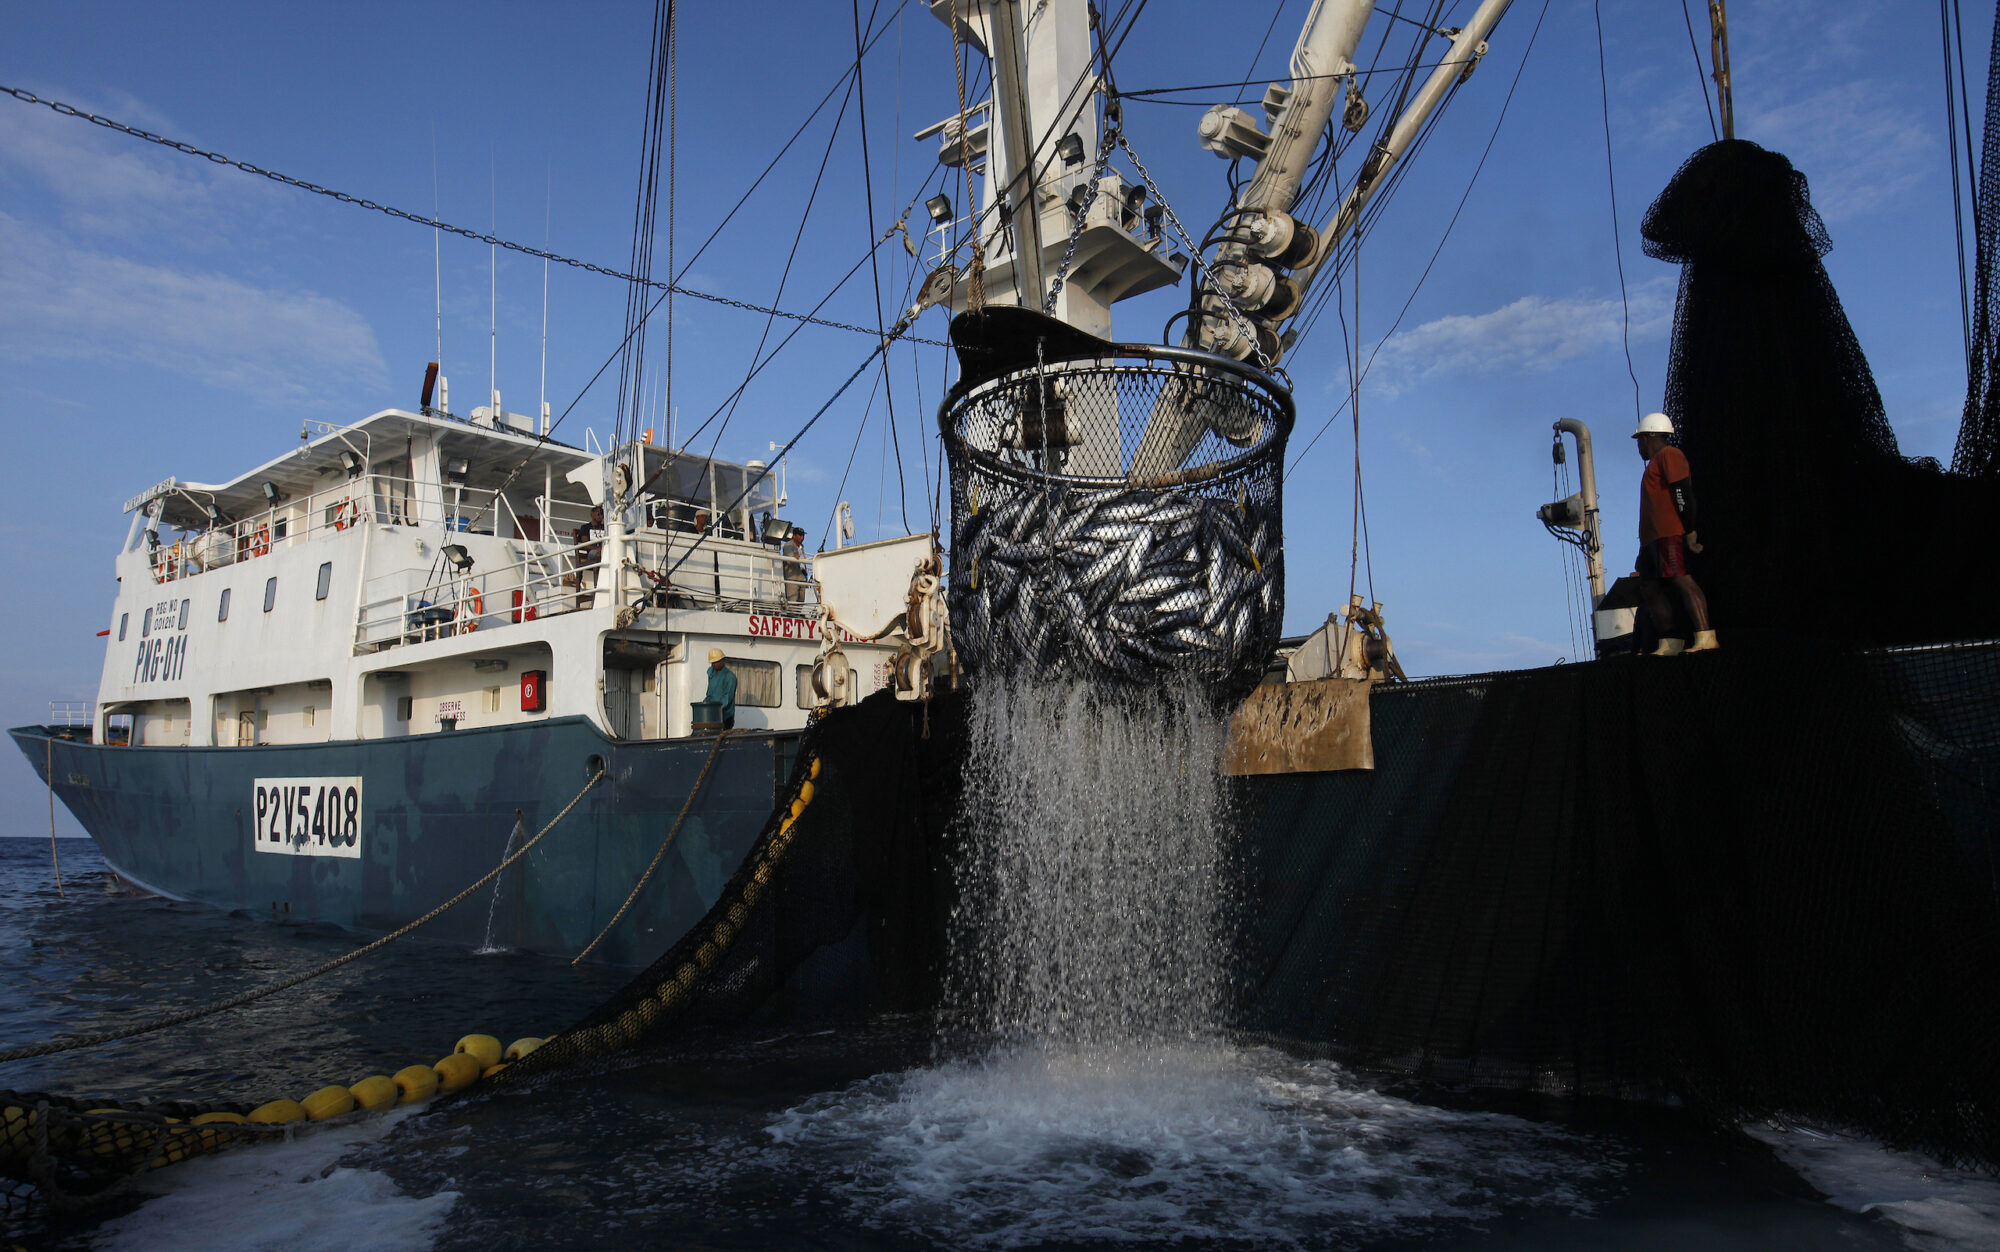 A scoop is used to haul tons of tuna onto the deck of the purse seine fishing boat 'Purple Lilac 888